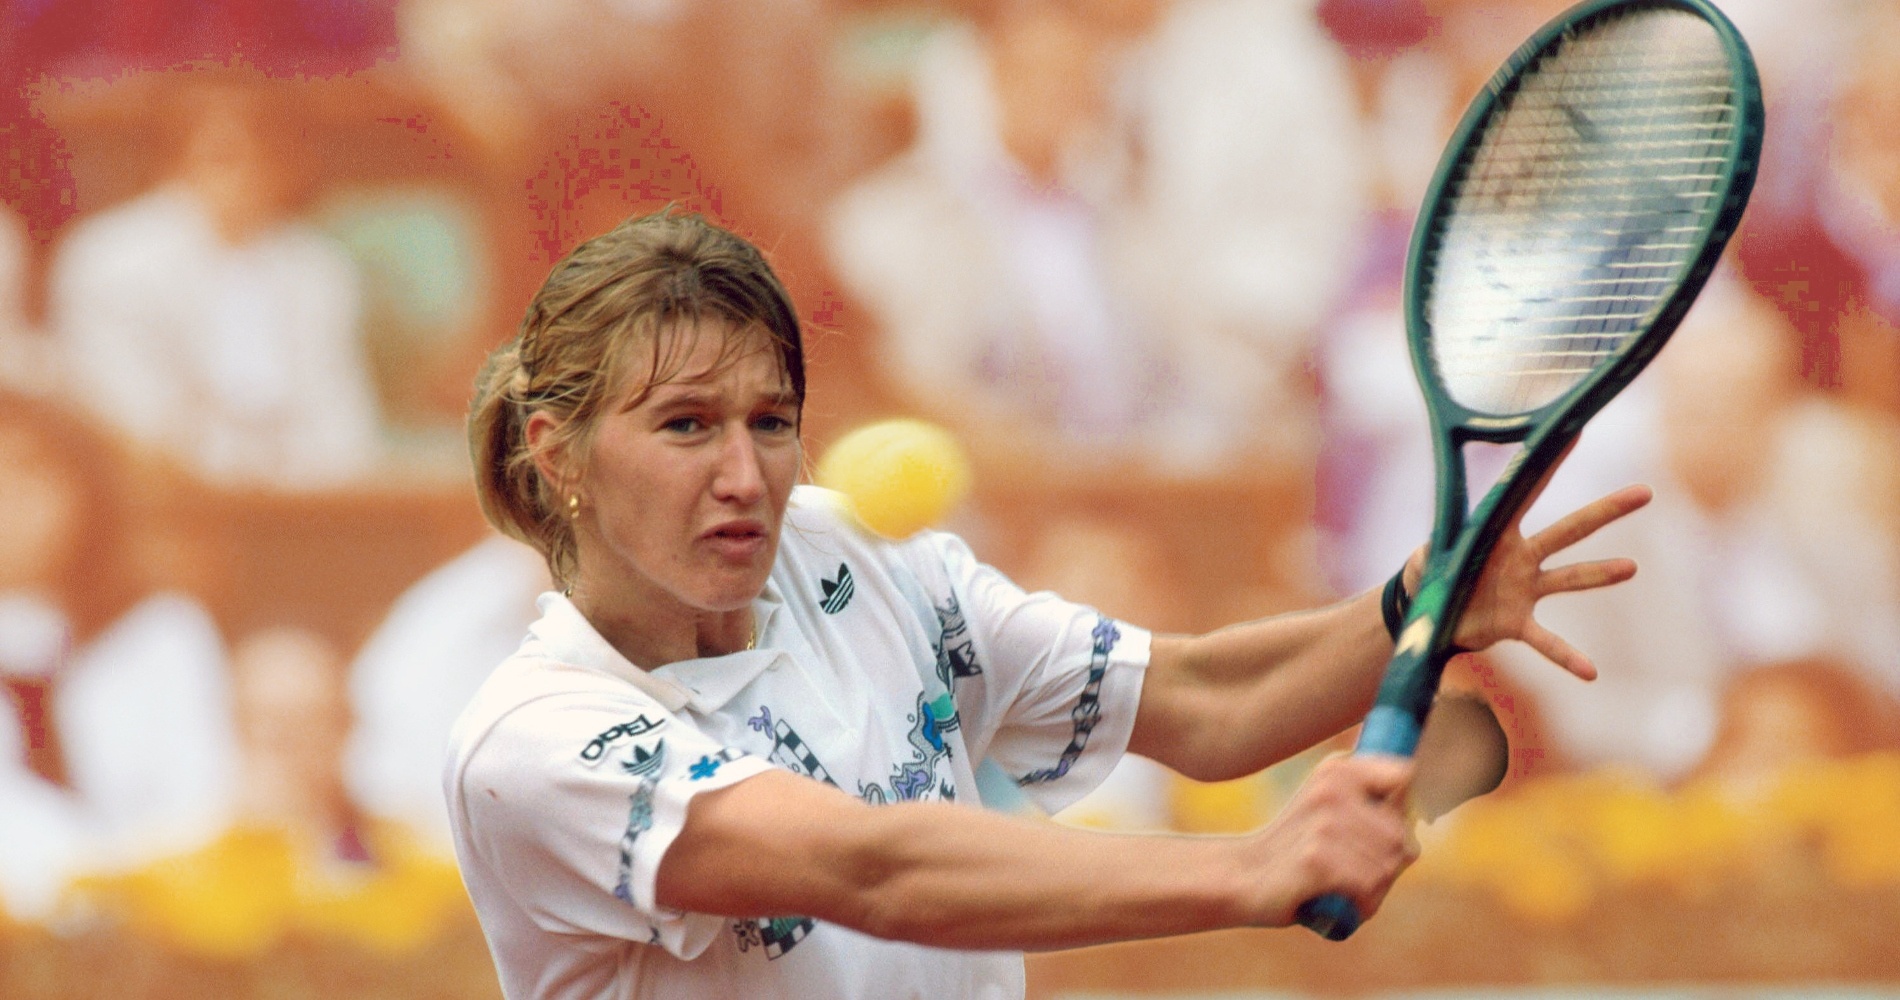 The day Graf became the youngest player to win a Grand Slam match